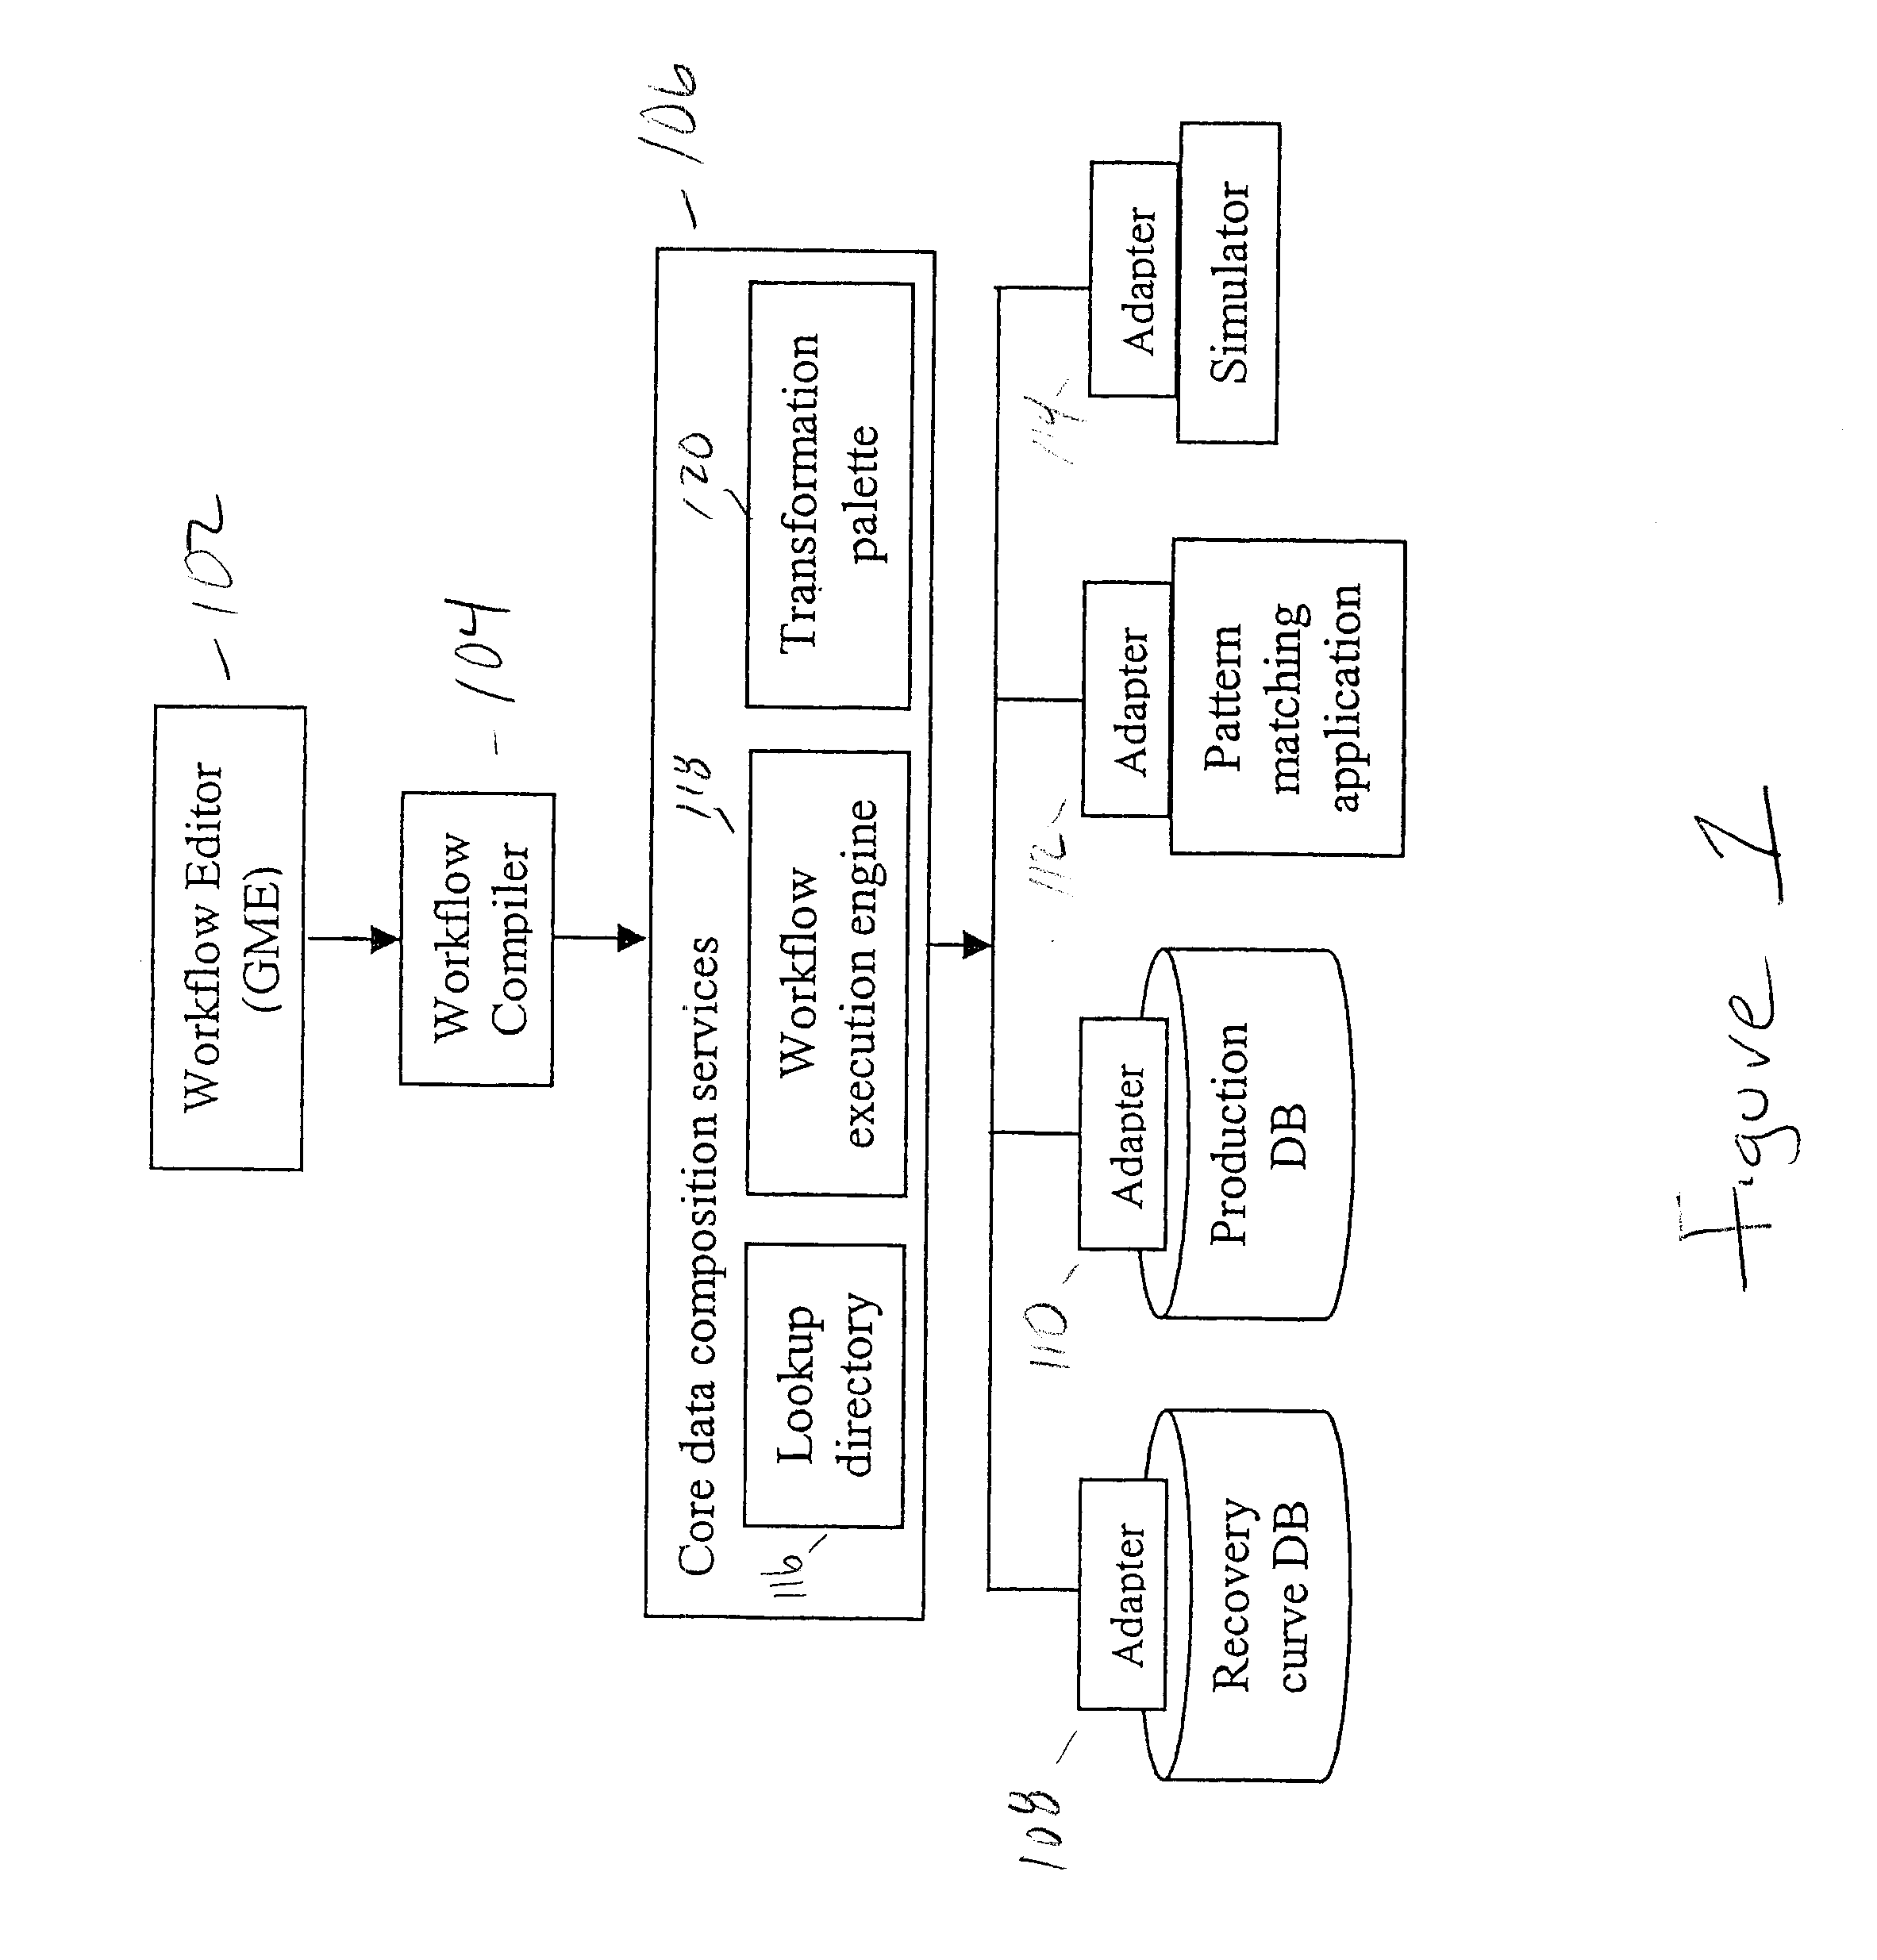 System and Method for Generating a Service Oriented Data Composition Architecture for Integrated Asset Management